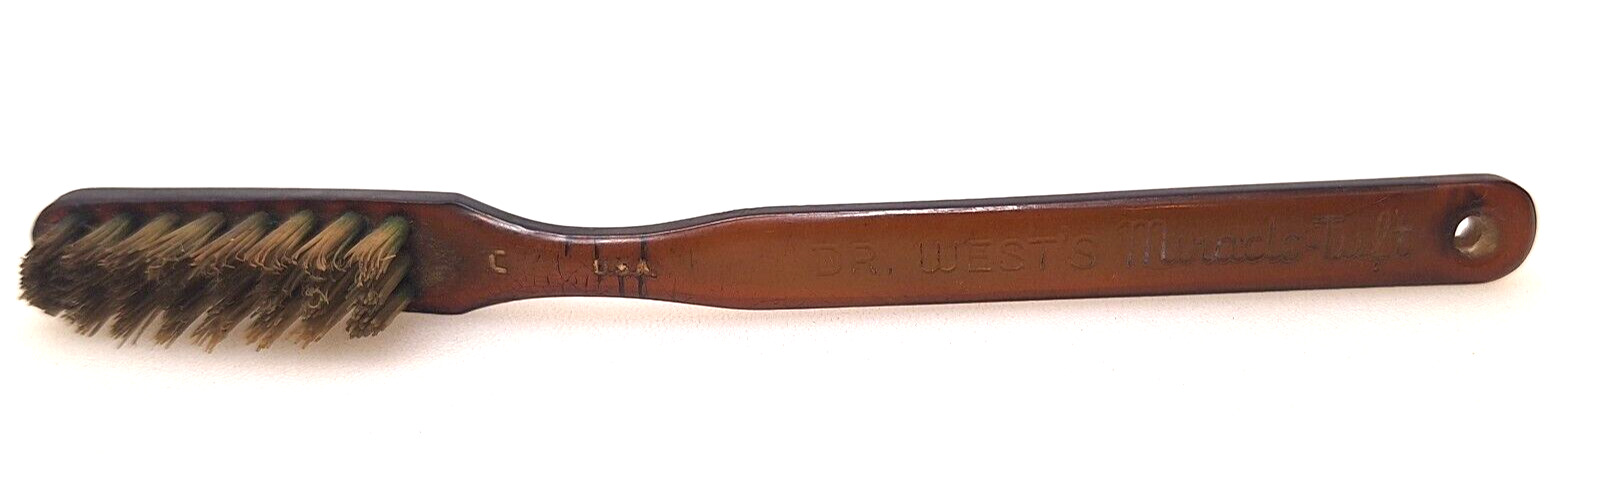 Vintage 1950s Dentist Toothbrush Dr. West\'s Miracle Tuft Brown WWII USA Made